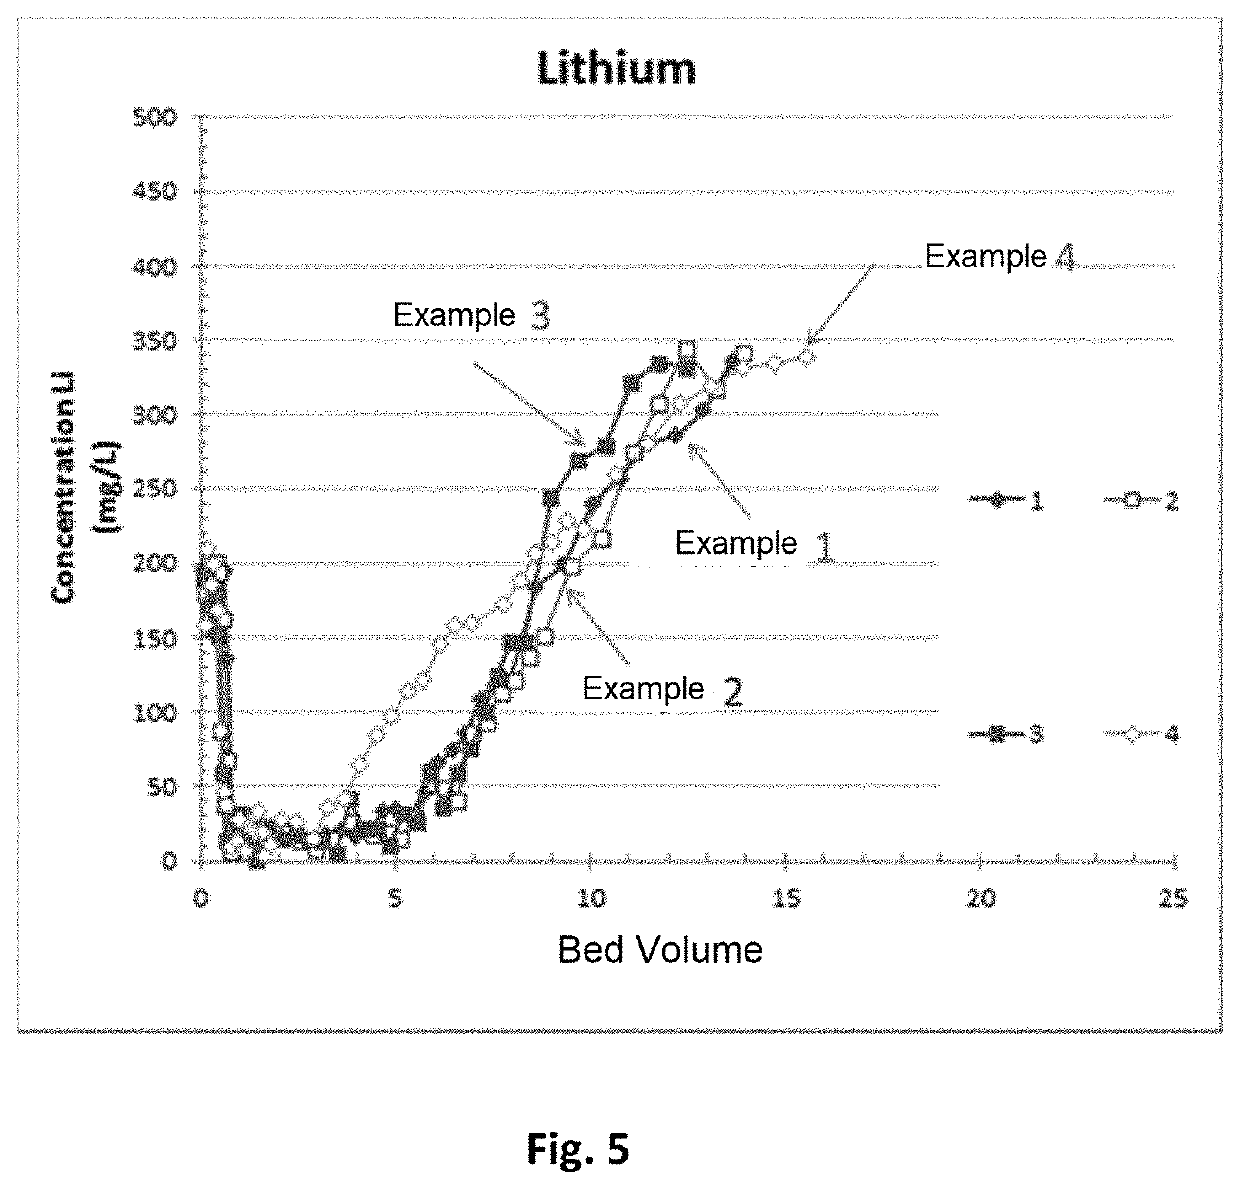 Process for preparing an adsorbent material and process for extracting lithium using said material